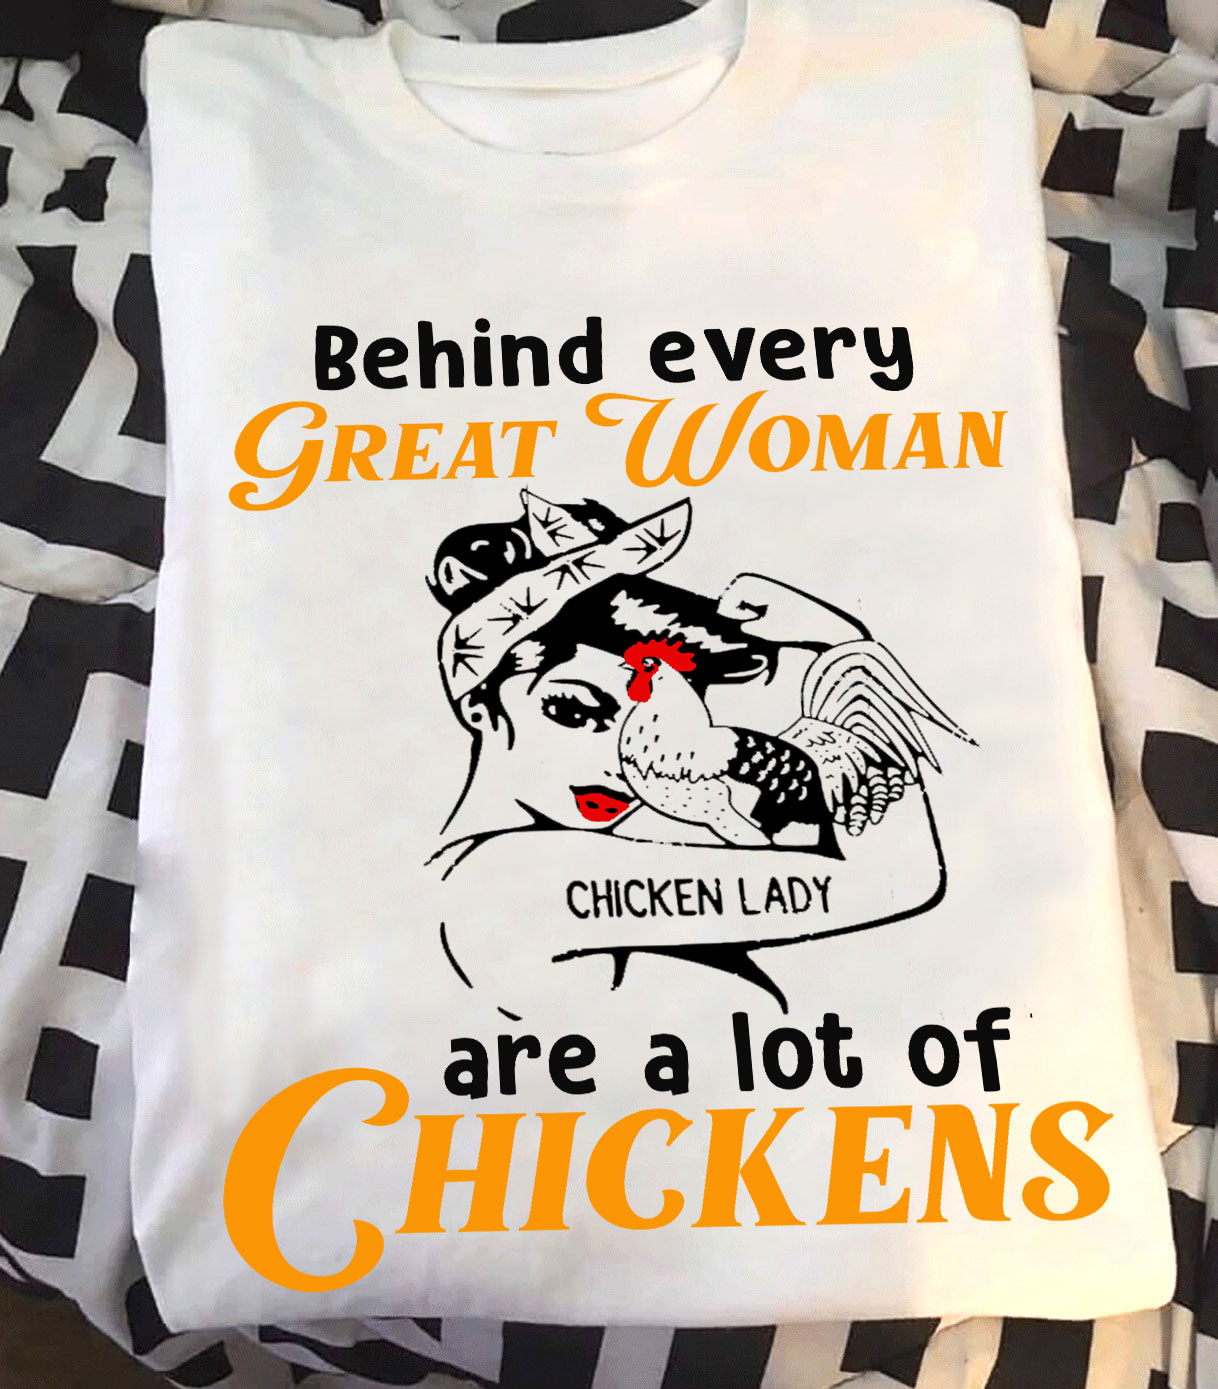 Behind every great woman are a lot of chickens - Chicken lady